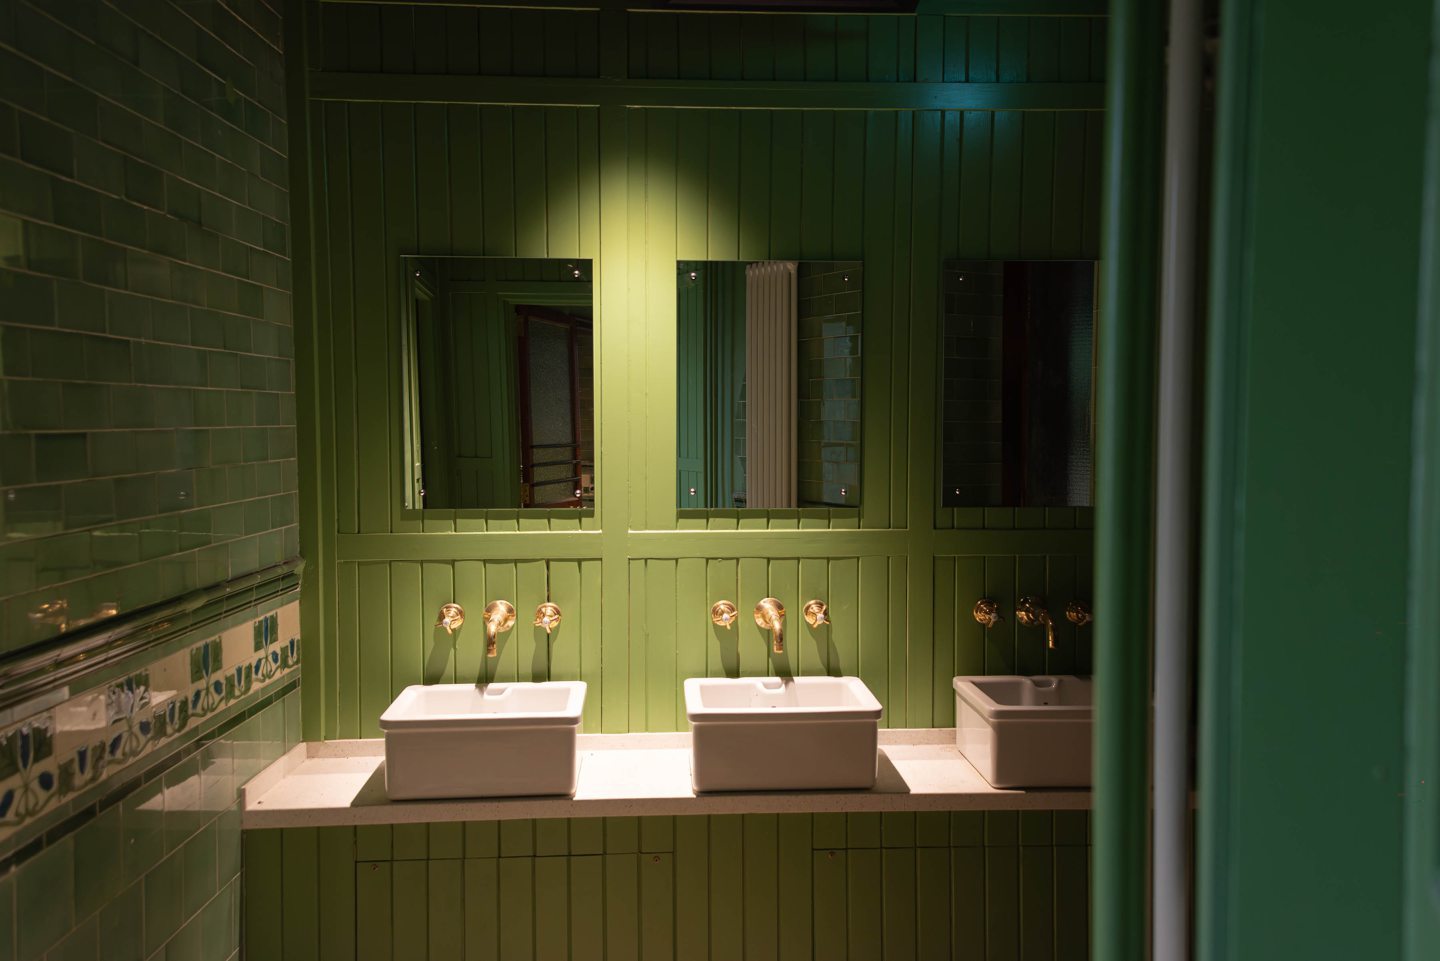 Section of the Victorian toilets with green walls, decorative tiling and ornate wash-hand basins.